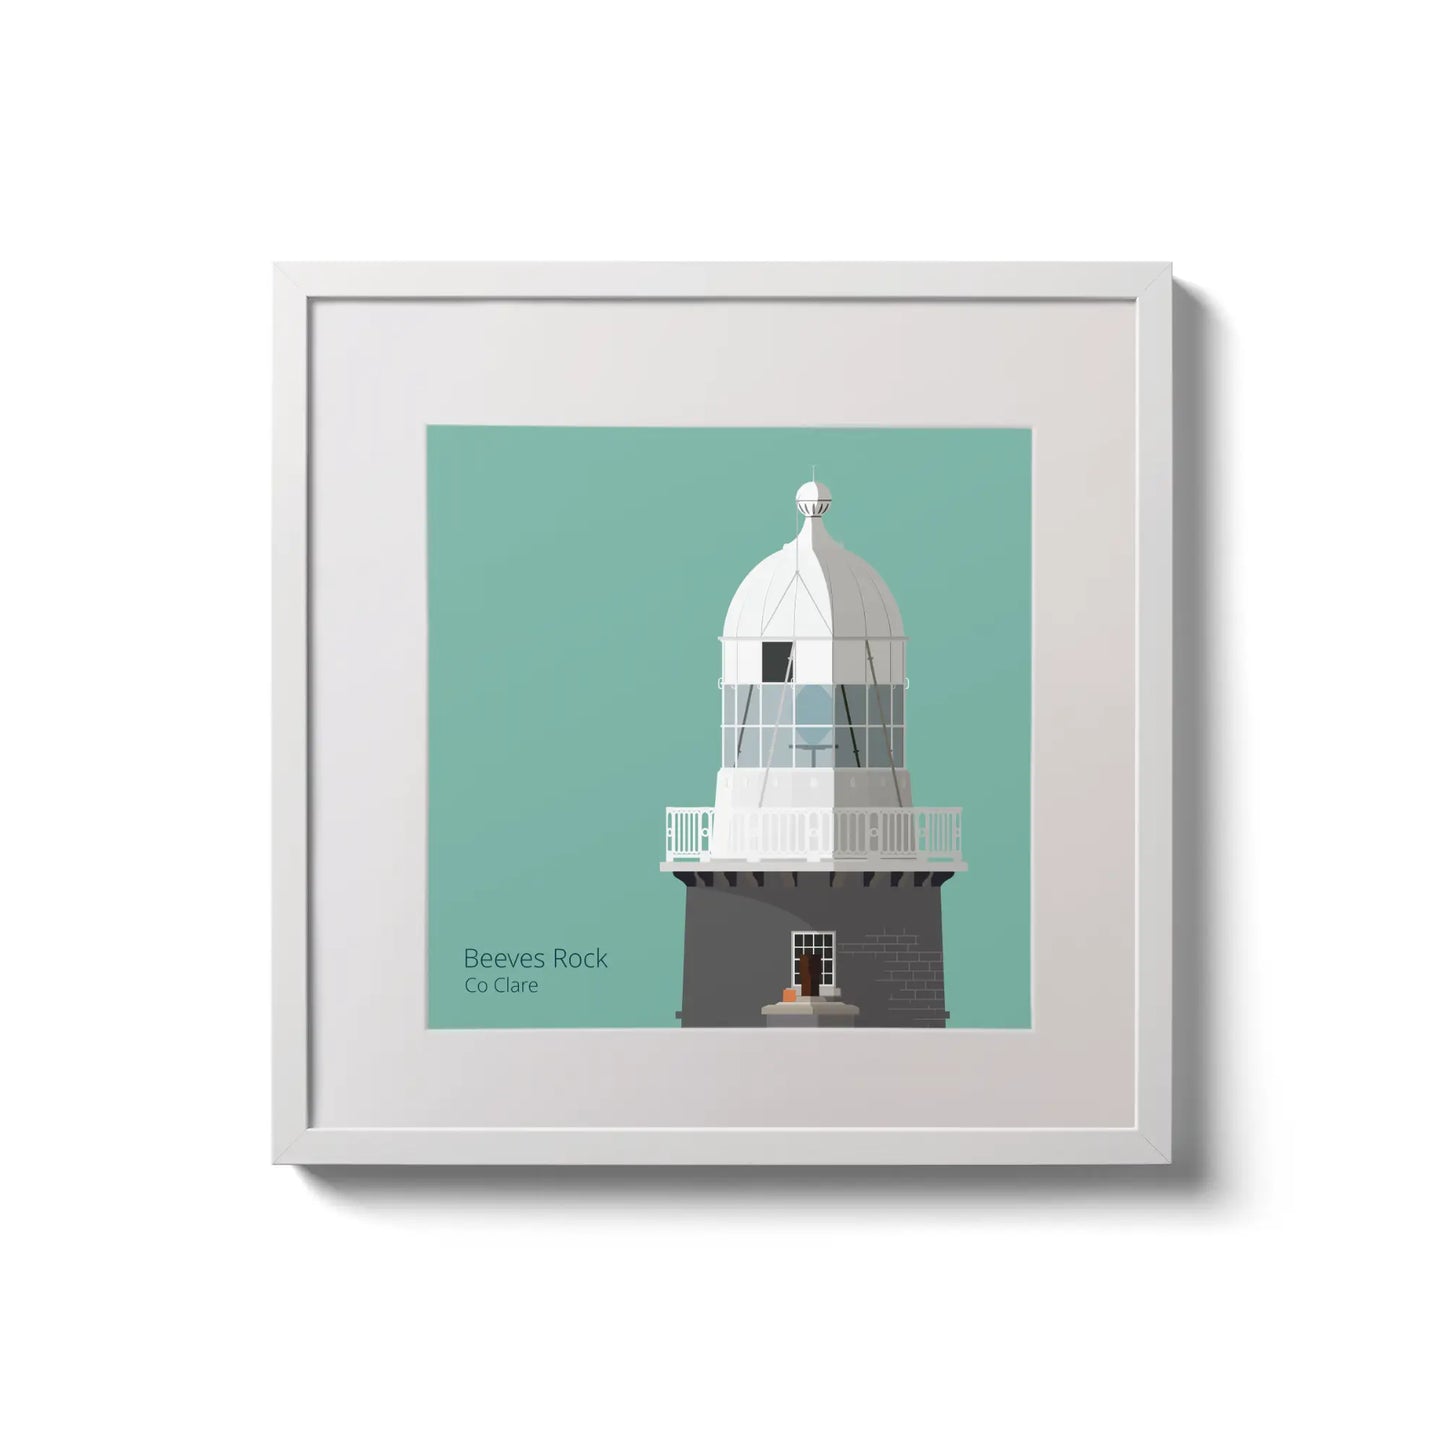 Illustration of Beeves Rock lighthouse on an ocean green background,  in a white square frame measuring 20x20cm.